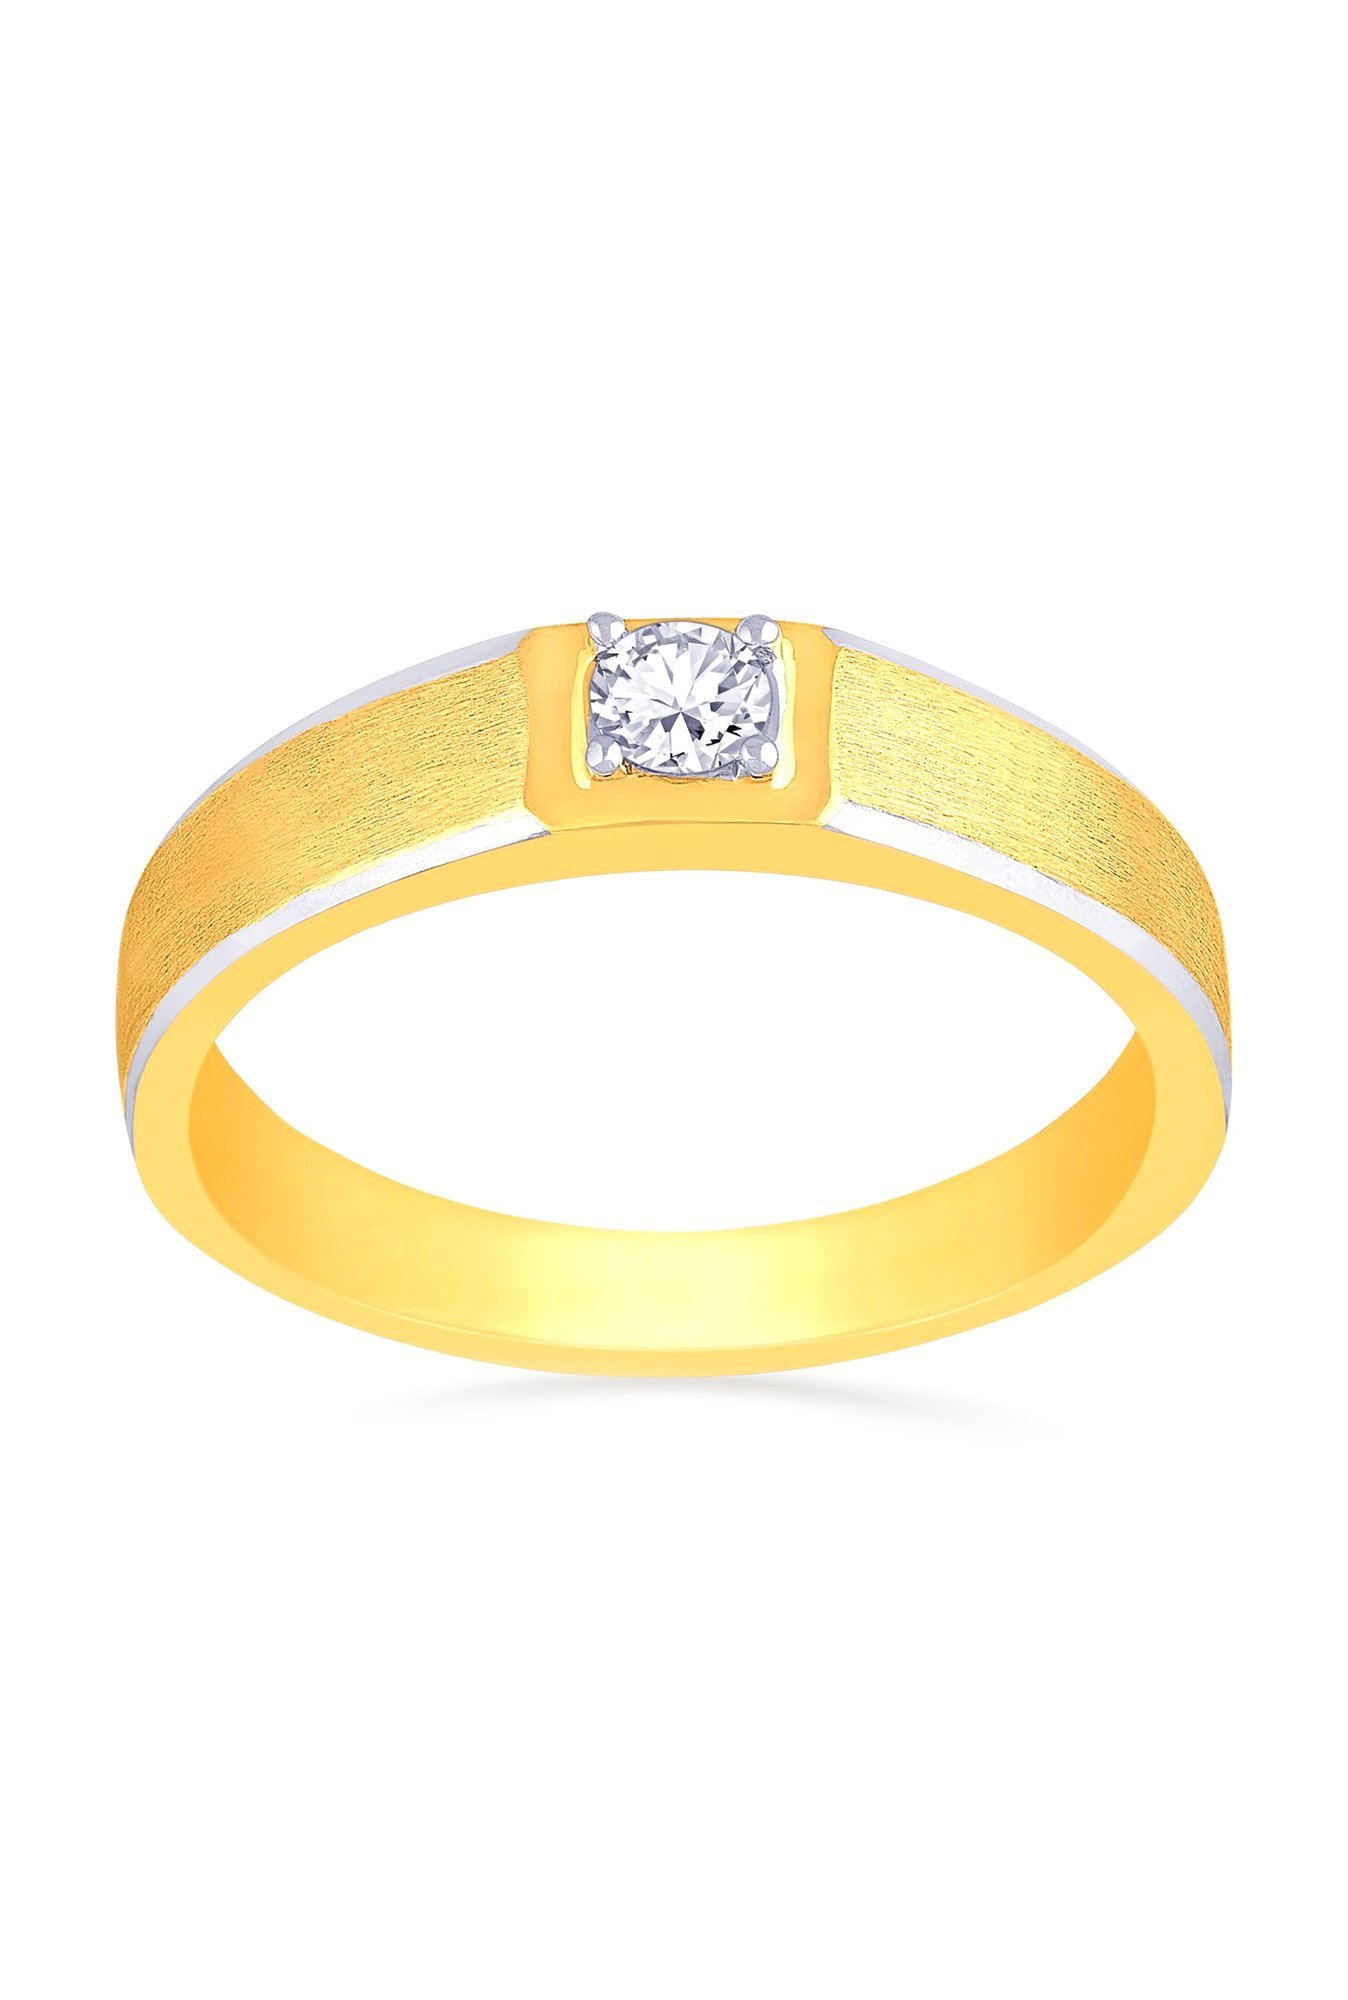 Gabriel & Co. 14K White Gold Intersecting Diamond Ring | Barry's Jewellers